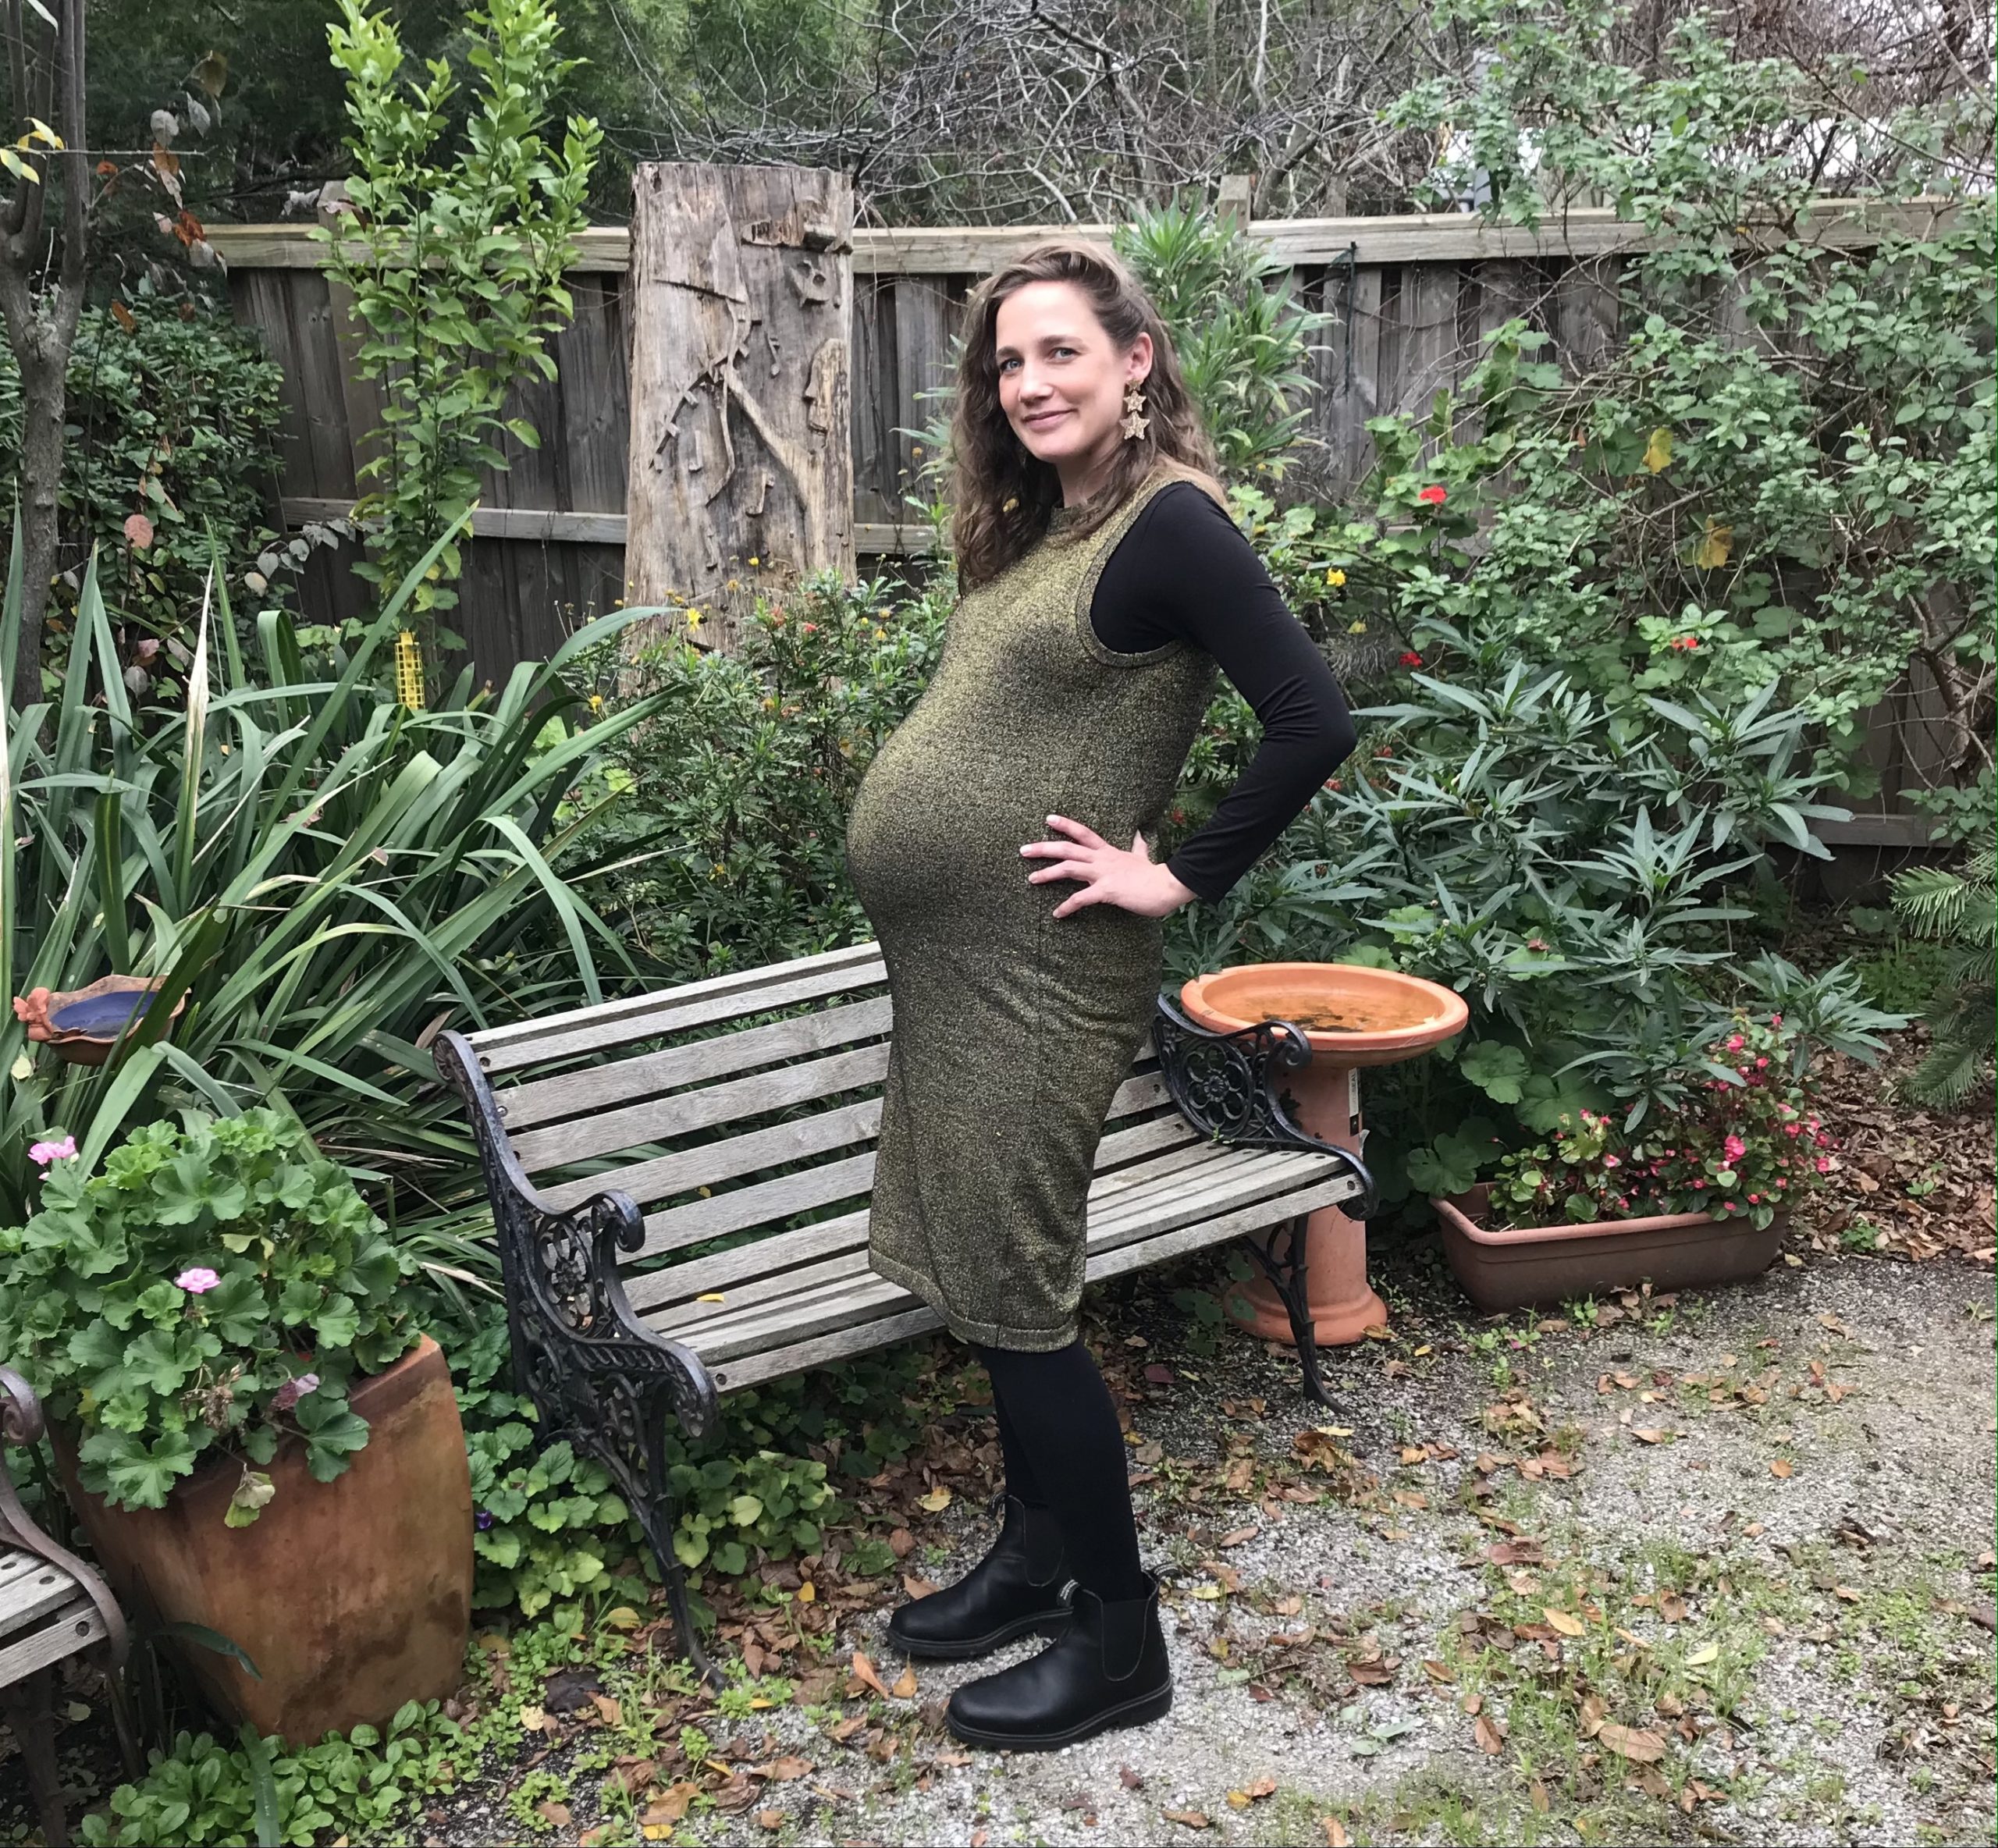 Emily standing in front of a bench in a lush garden. She is pregnant and has her hands on her hips.